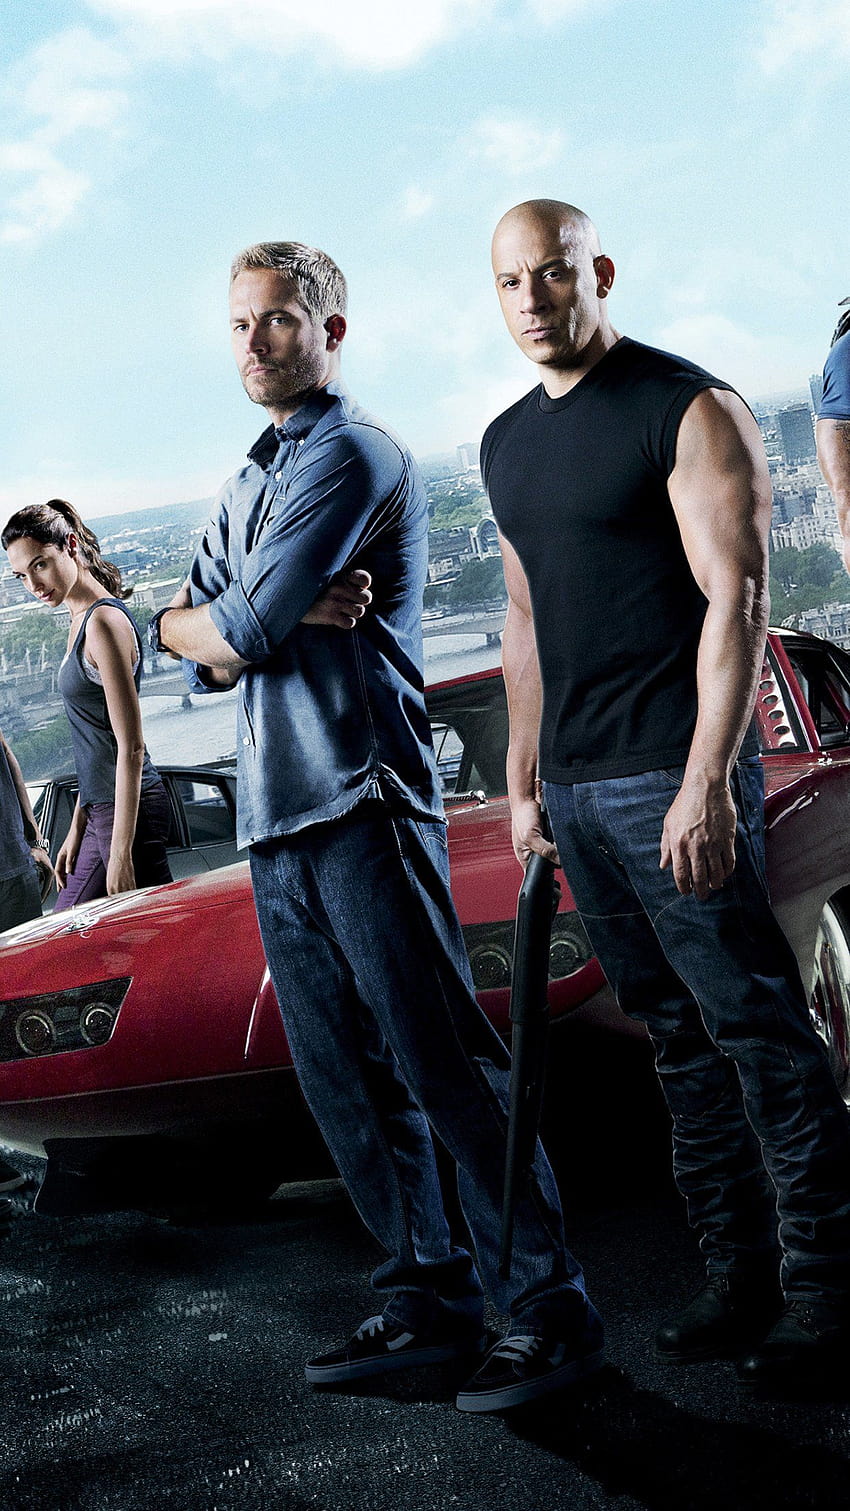 Fast Furious 6 for iPhone X 8 7 6 [1242x2208]、モバイル & タブレット、Fast and Furious 映画 iPhone 用 HD電話の壁紙